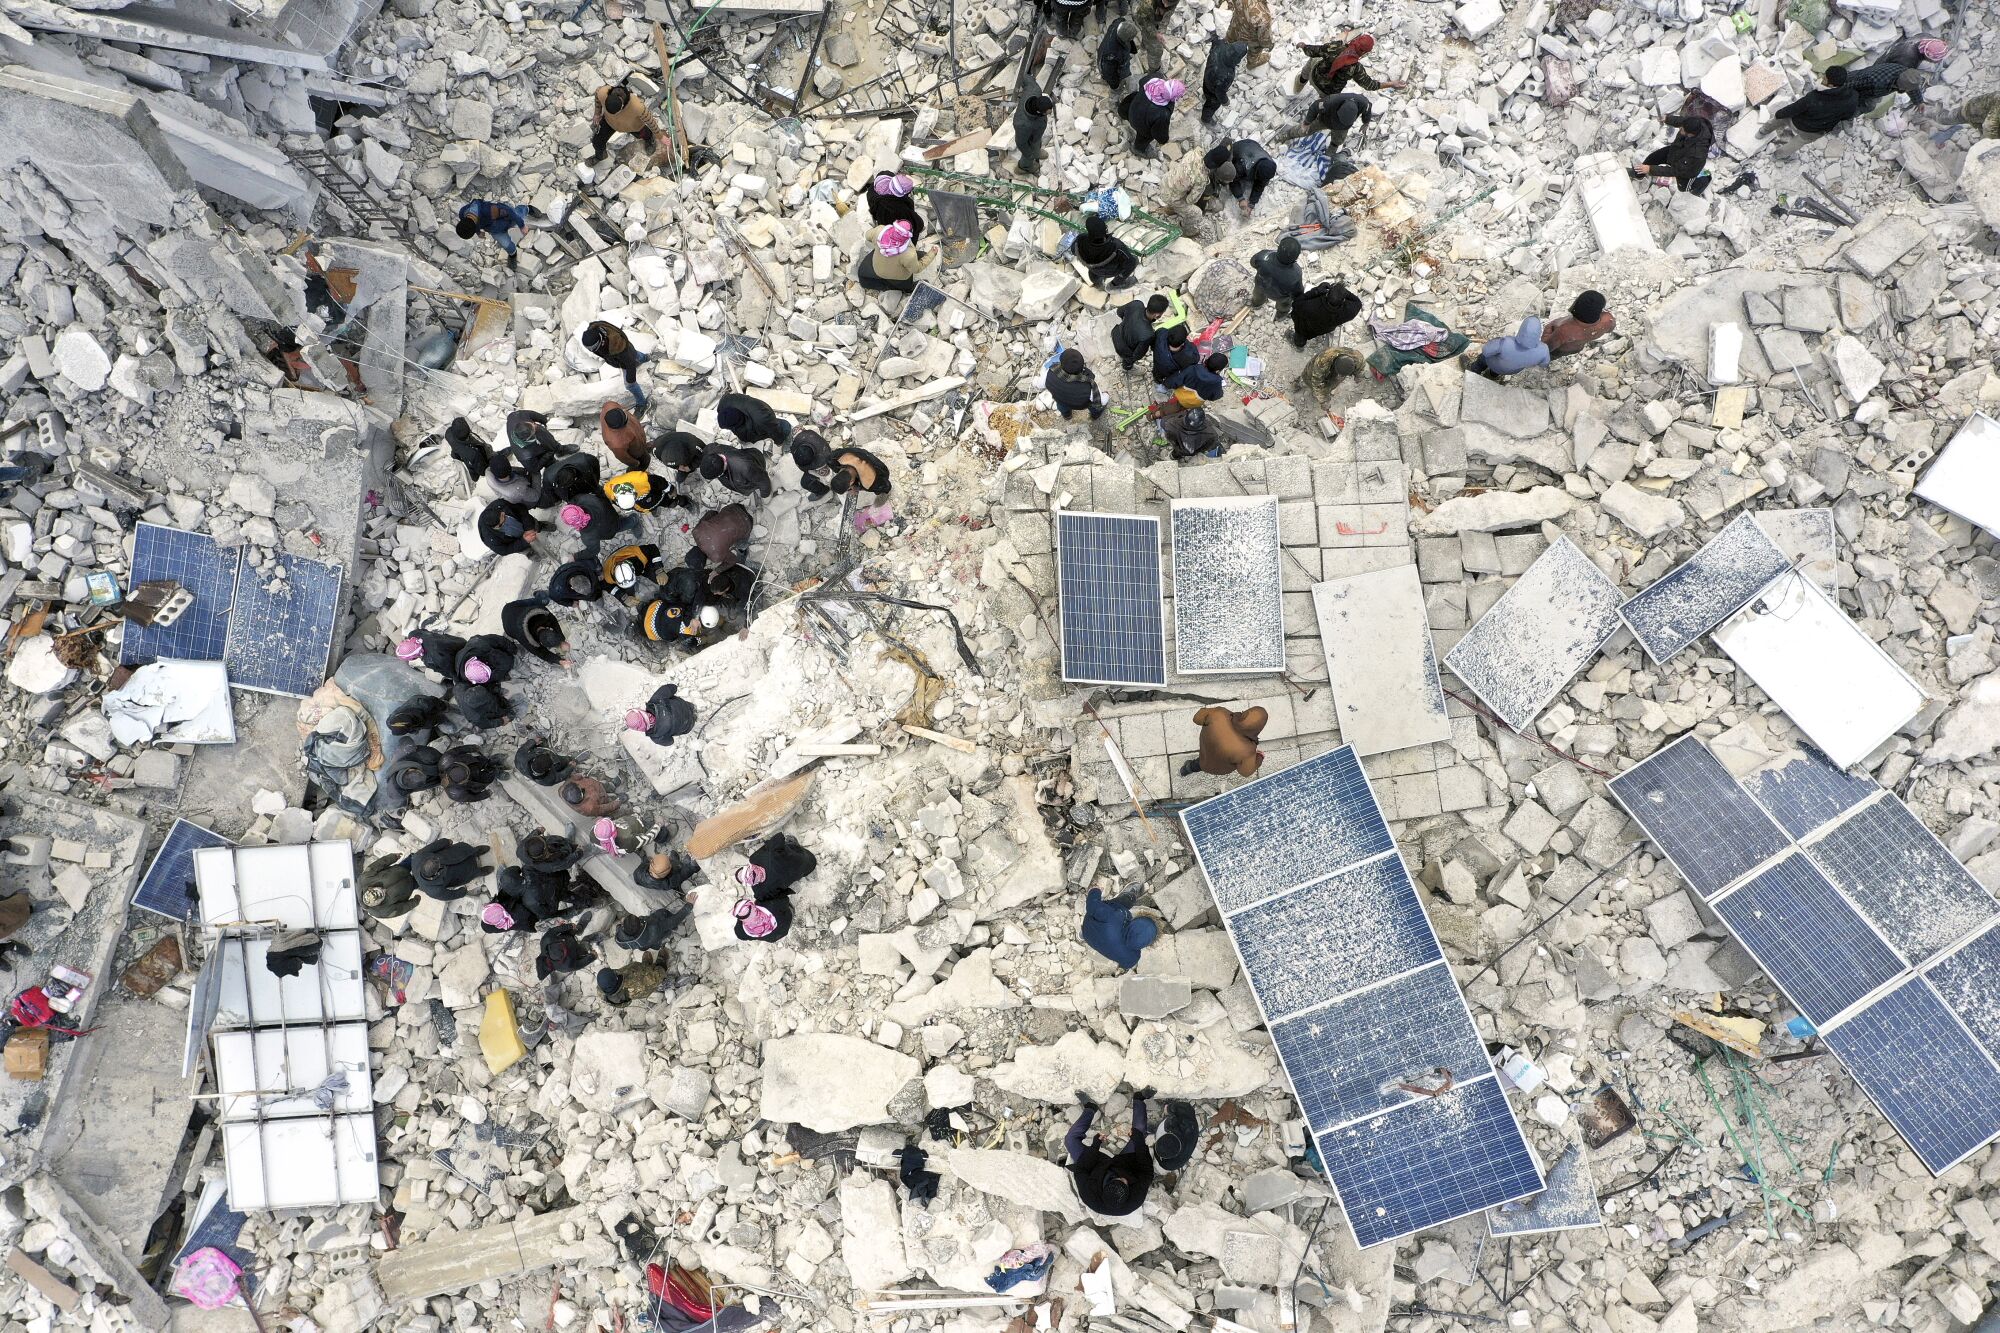 An aerial topdown view of a large area flattened with concrete and debris and mana people walking stop of it.